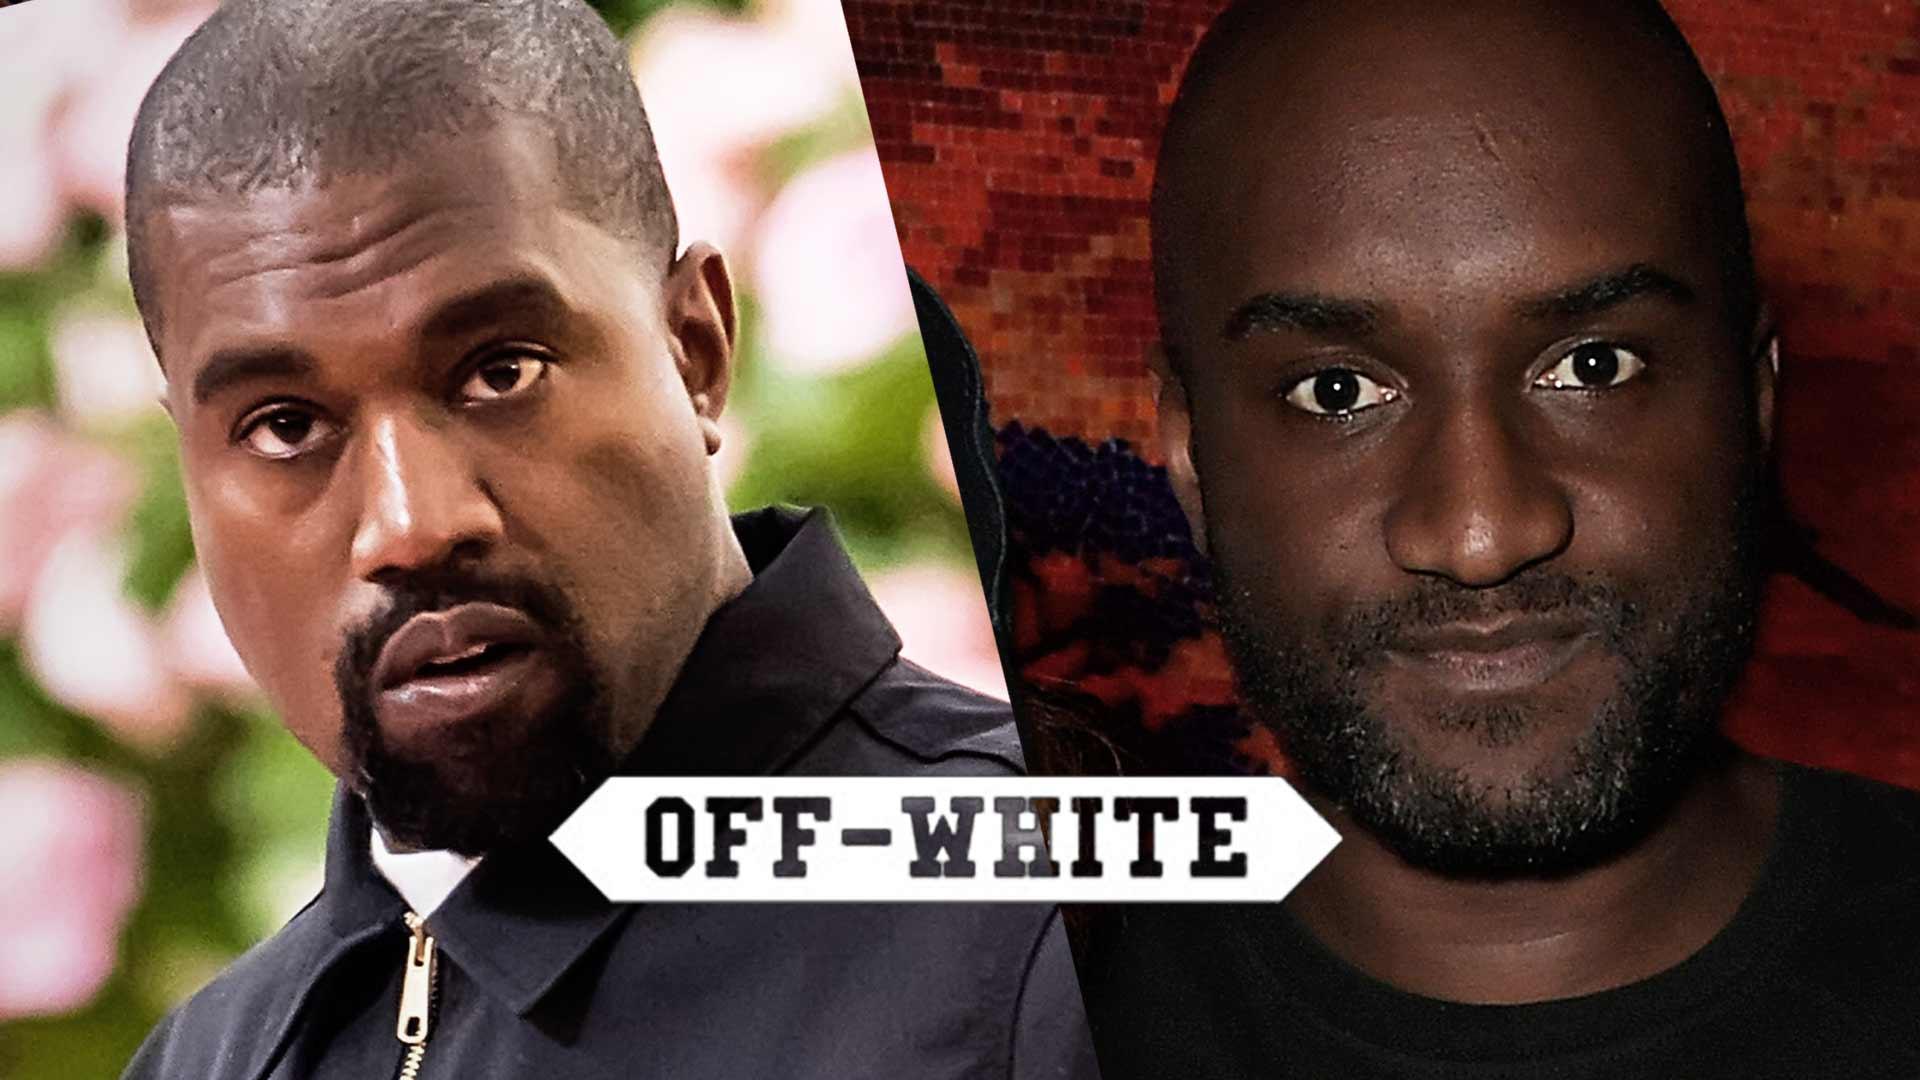 Virgil Abloh’s Off-White Fashion Line Sued For Allegedly Ripping Off Name